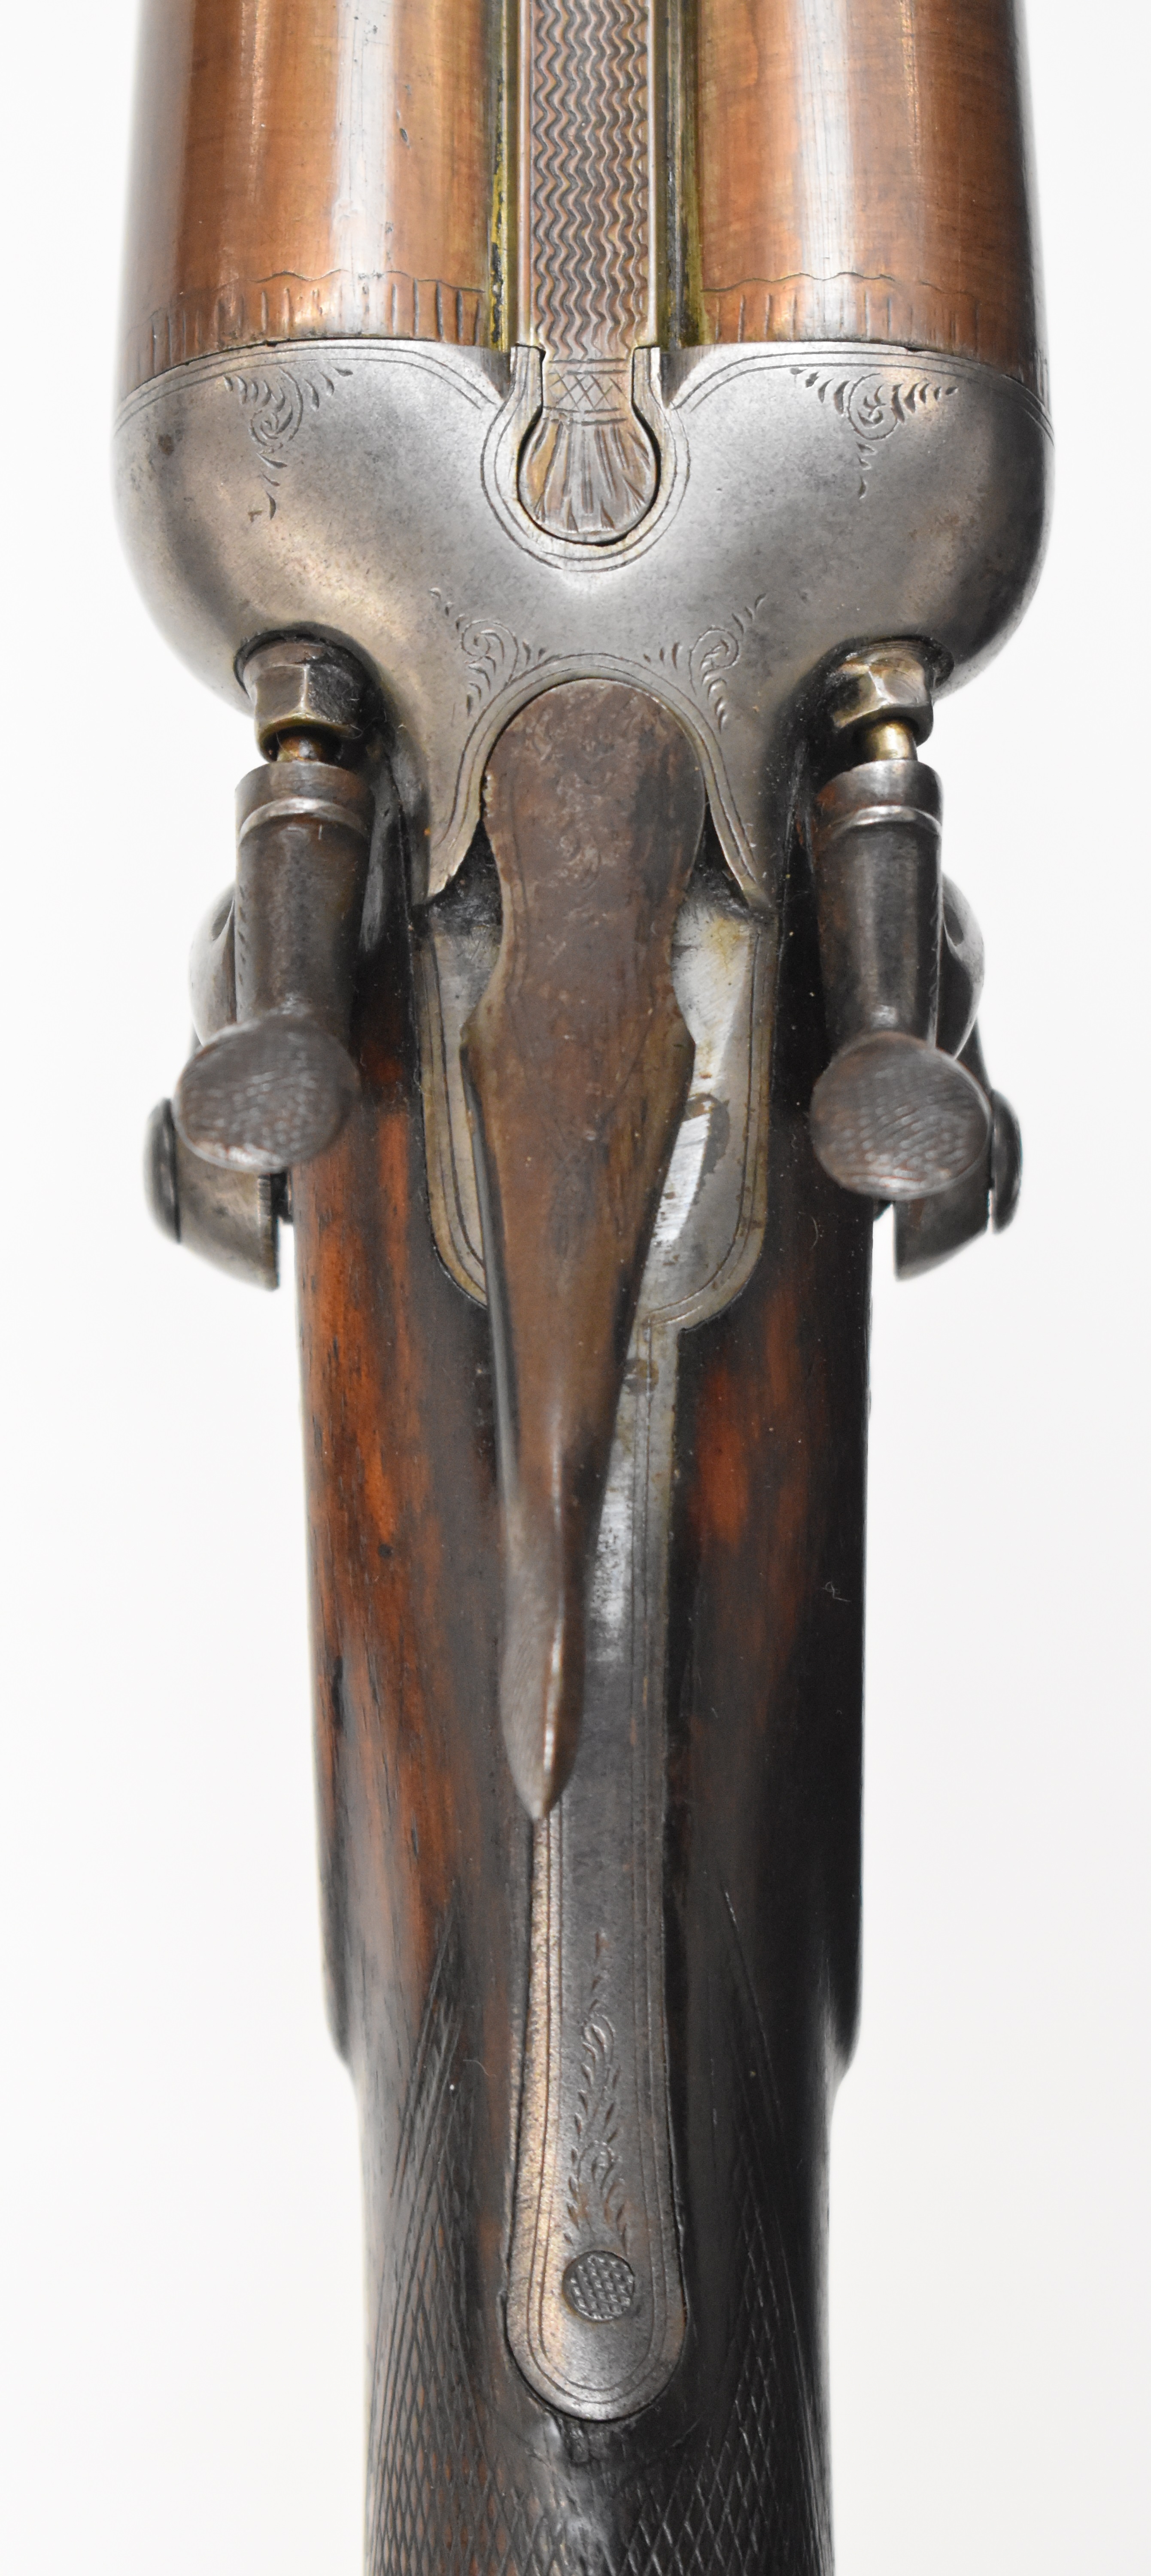 Skimin & Wood 12 bore side by side hammer action shotgun with engraved scenes of birds to the locks, - Image 5 of 12